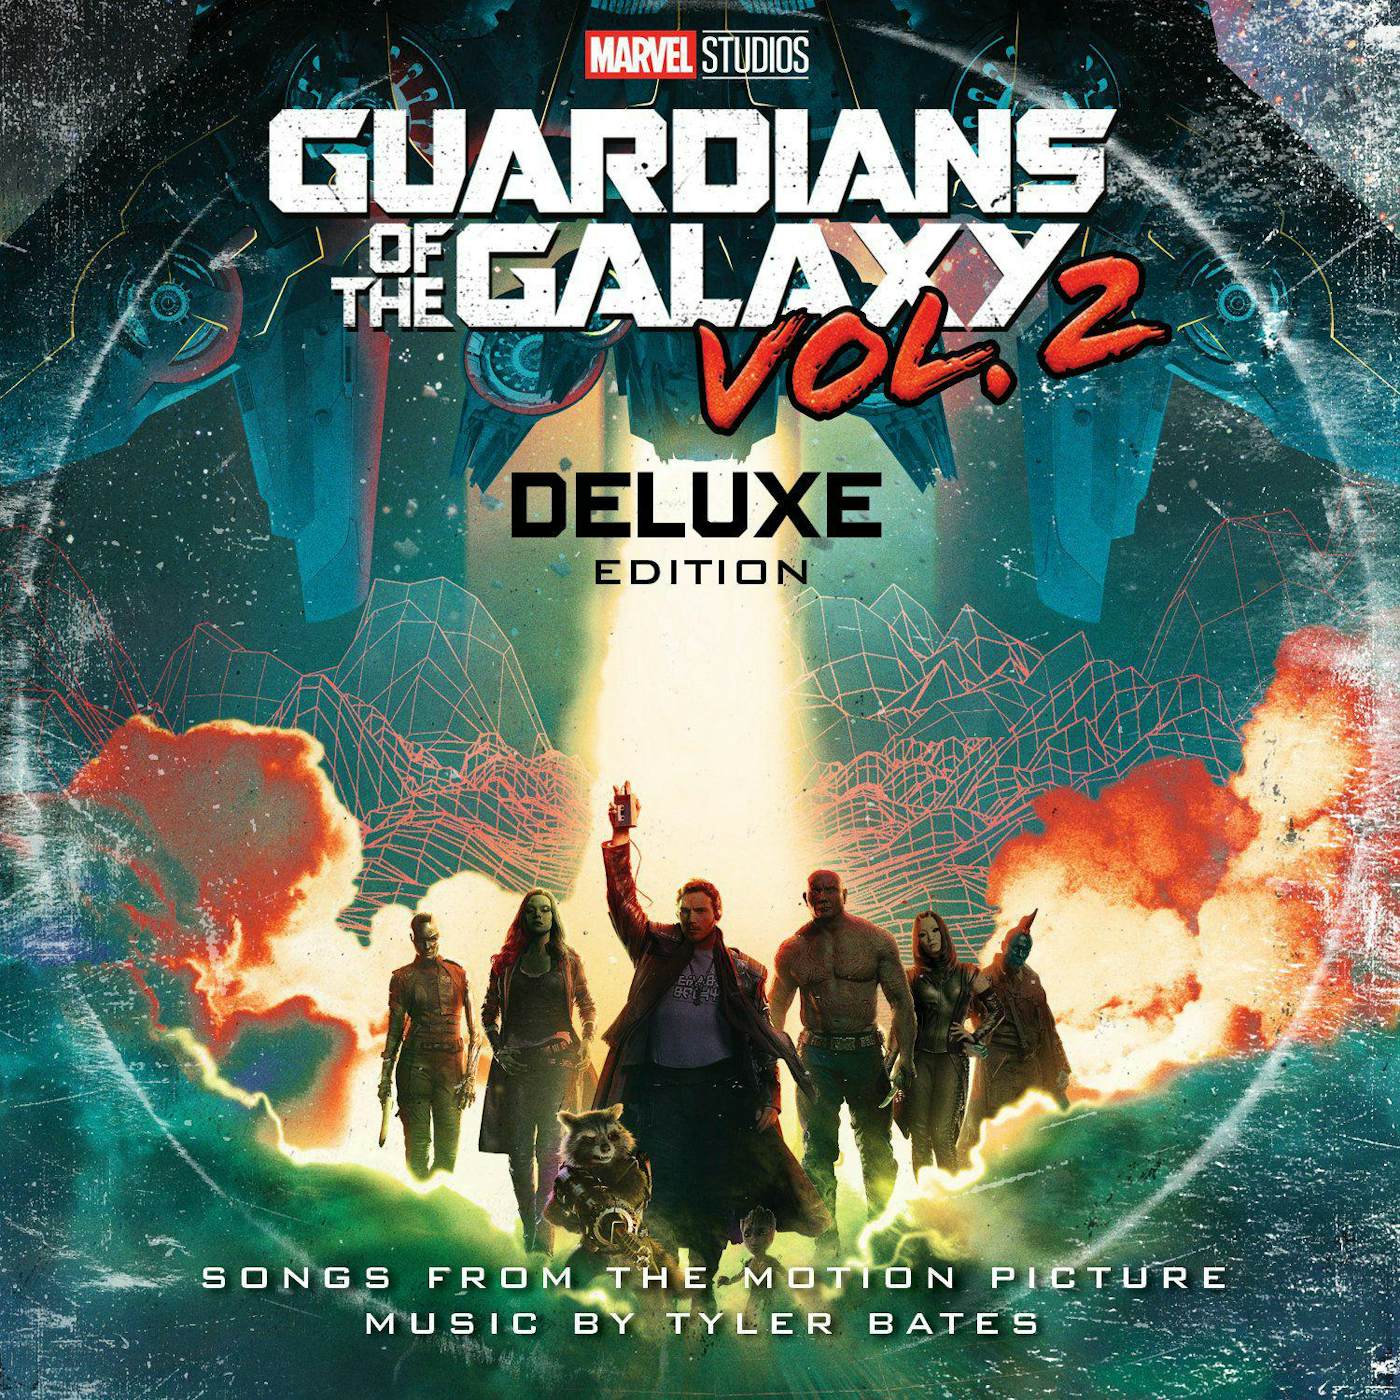  Guardians Of The Galaxy Vol. 2: Awesome Mix Vol. 2 (Deluxe/2LP) Vinyl Record